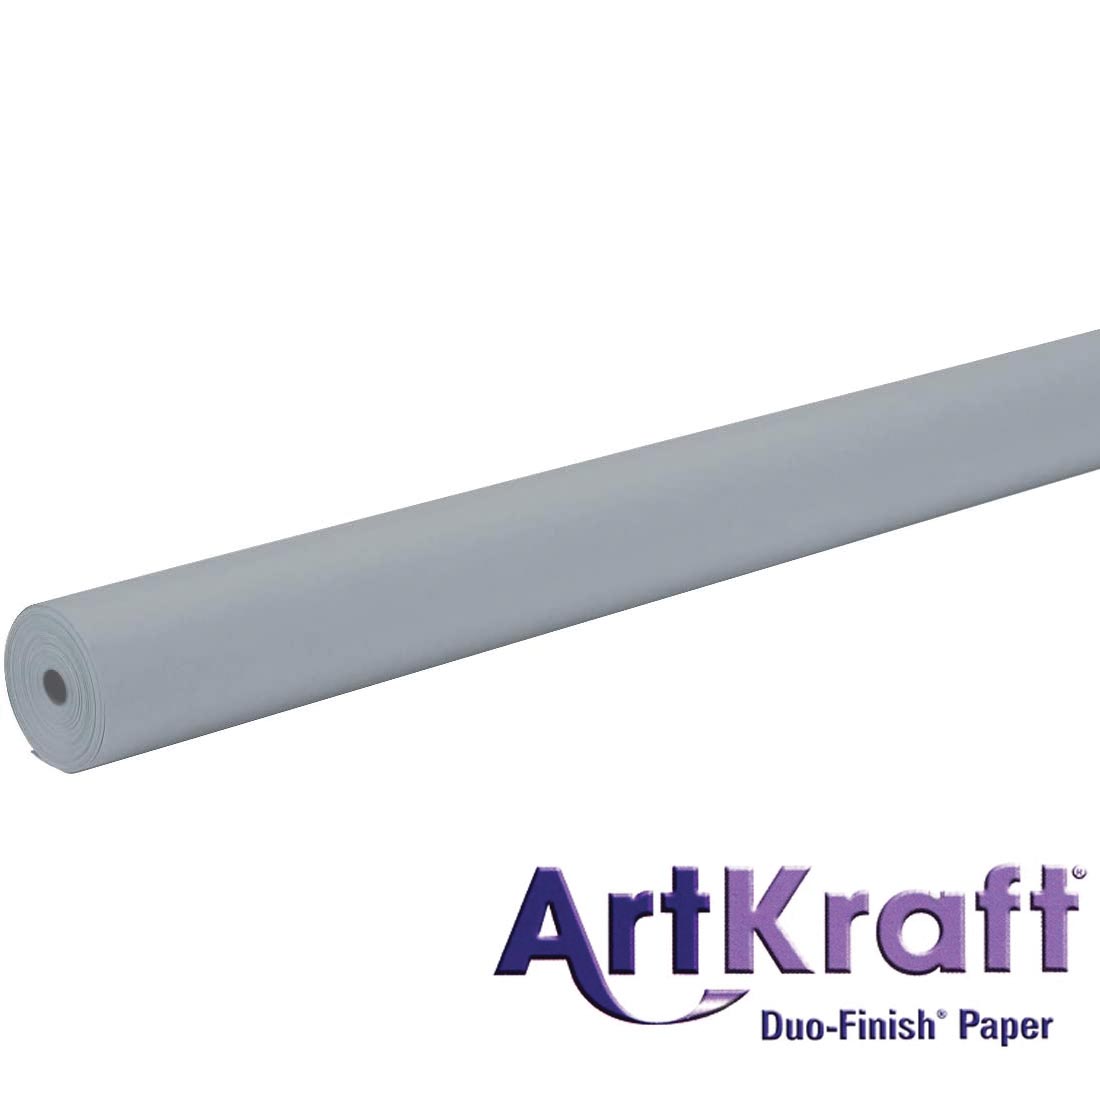 Roll of Gray Paper with text ArtKraft Duo-Finish Paper